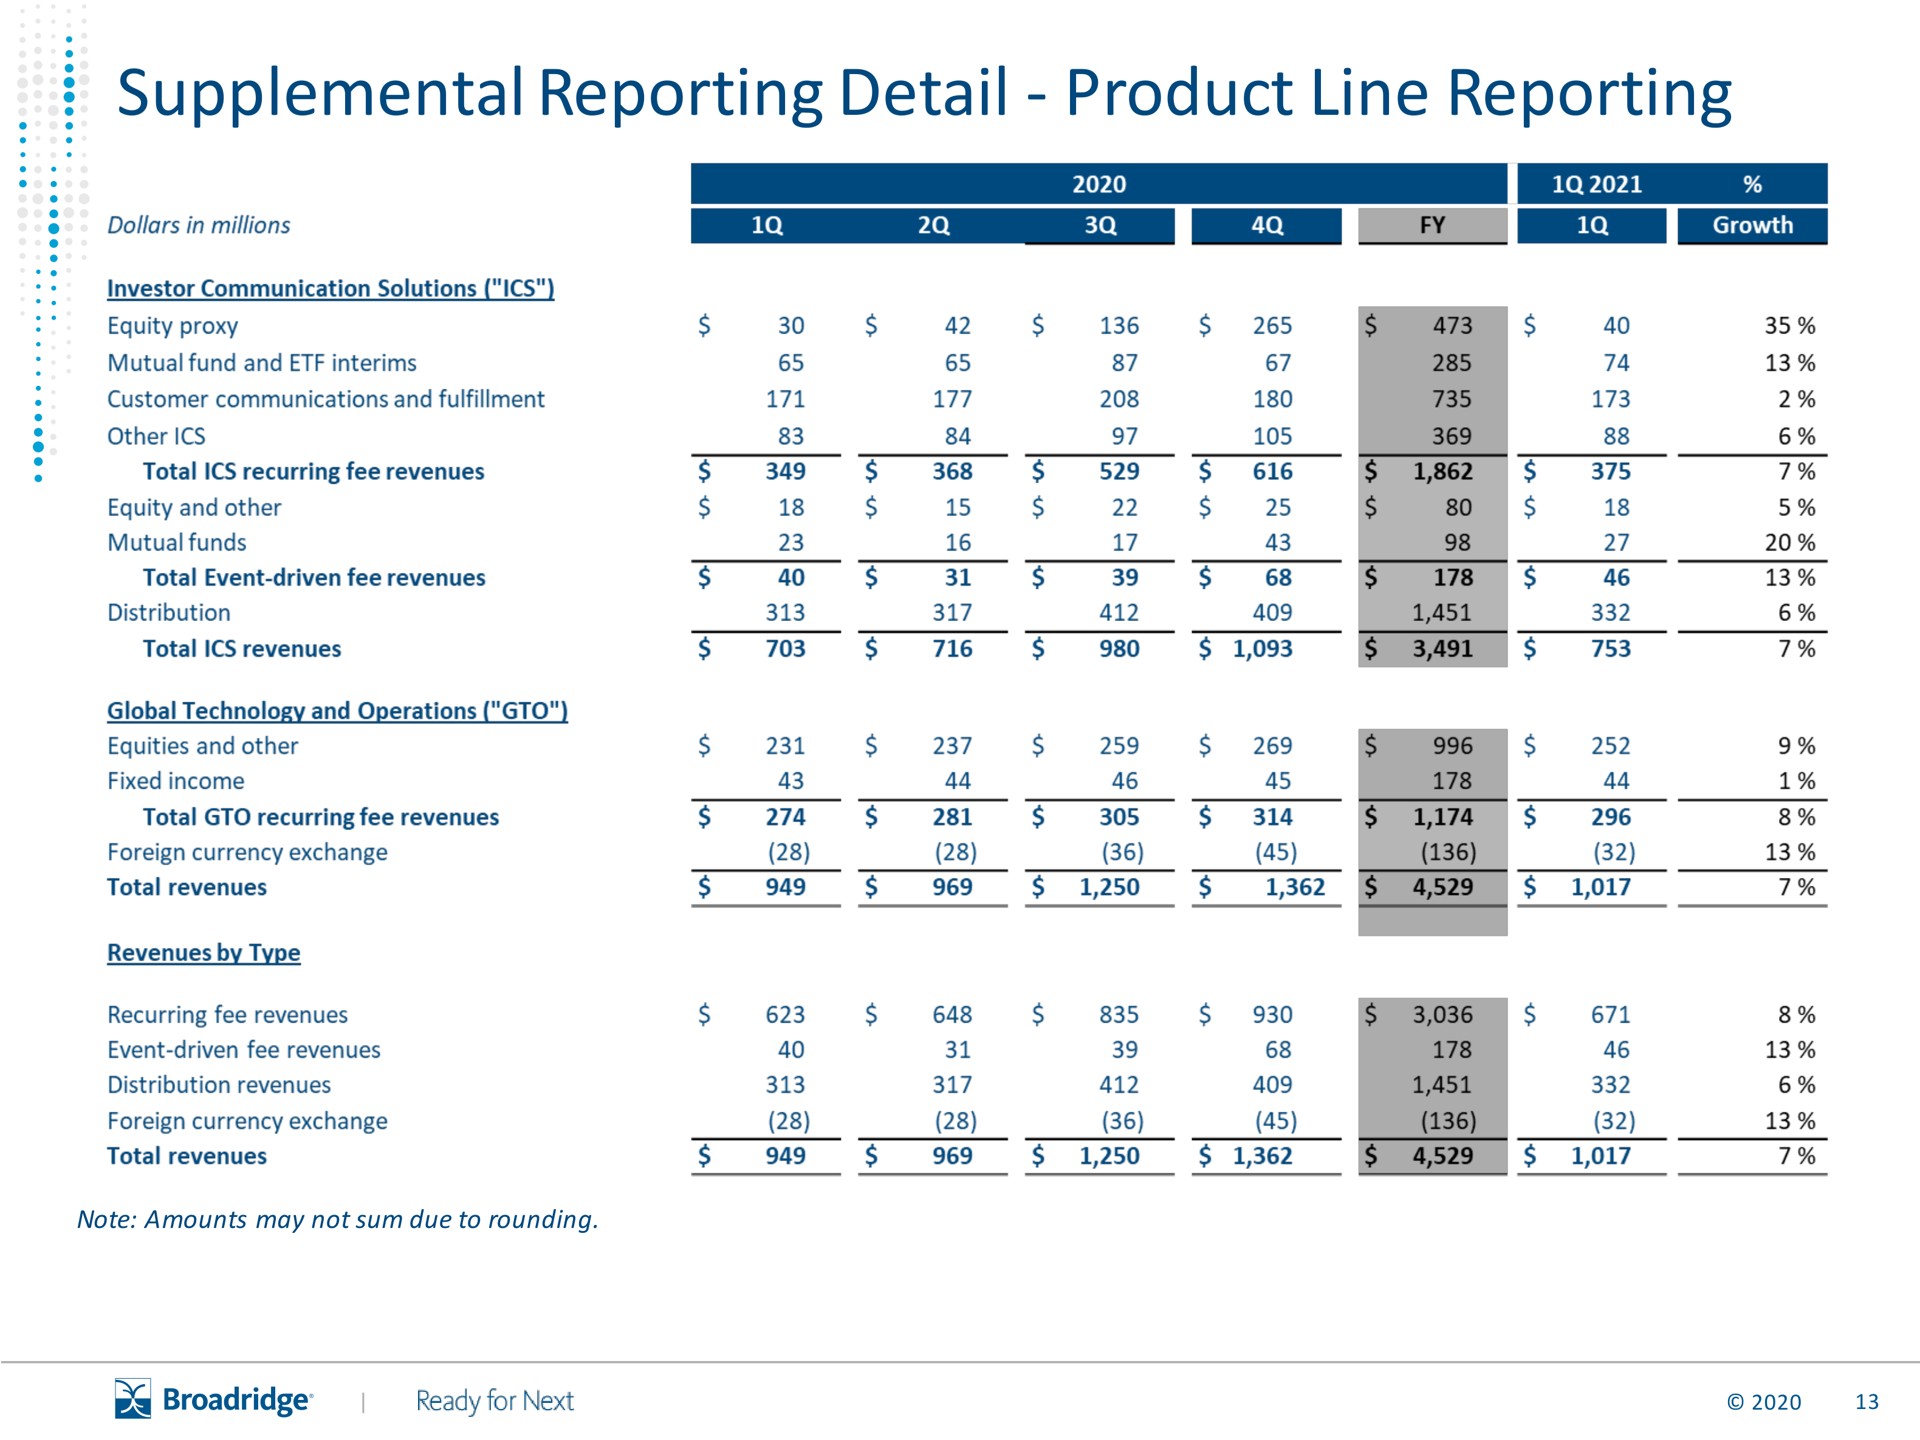 supplemental reporting detail product line reporting growth | Broadridge Financial Solutions